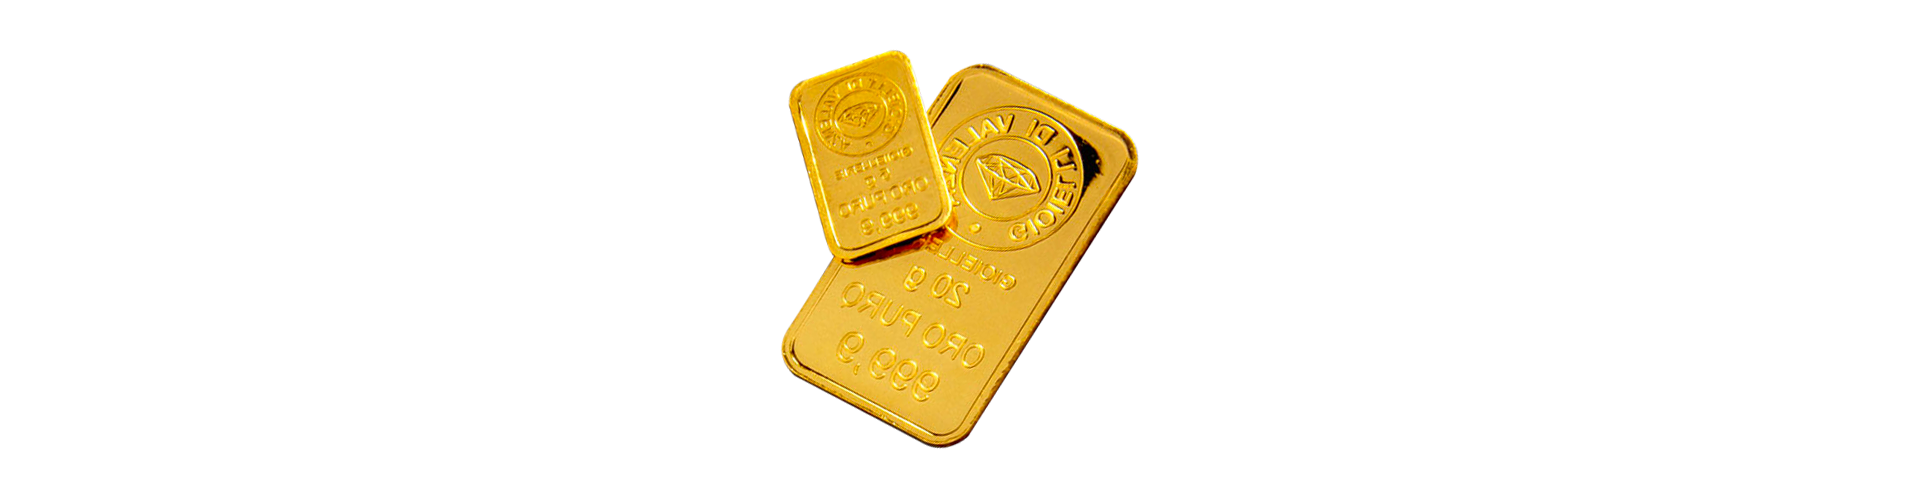 Ingots and pounds investement in gold | GV